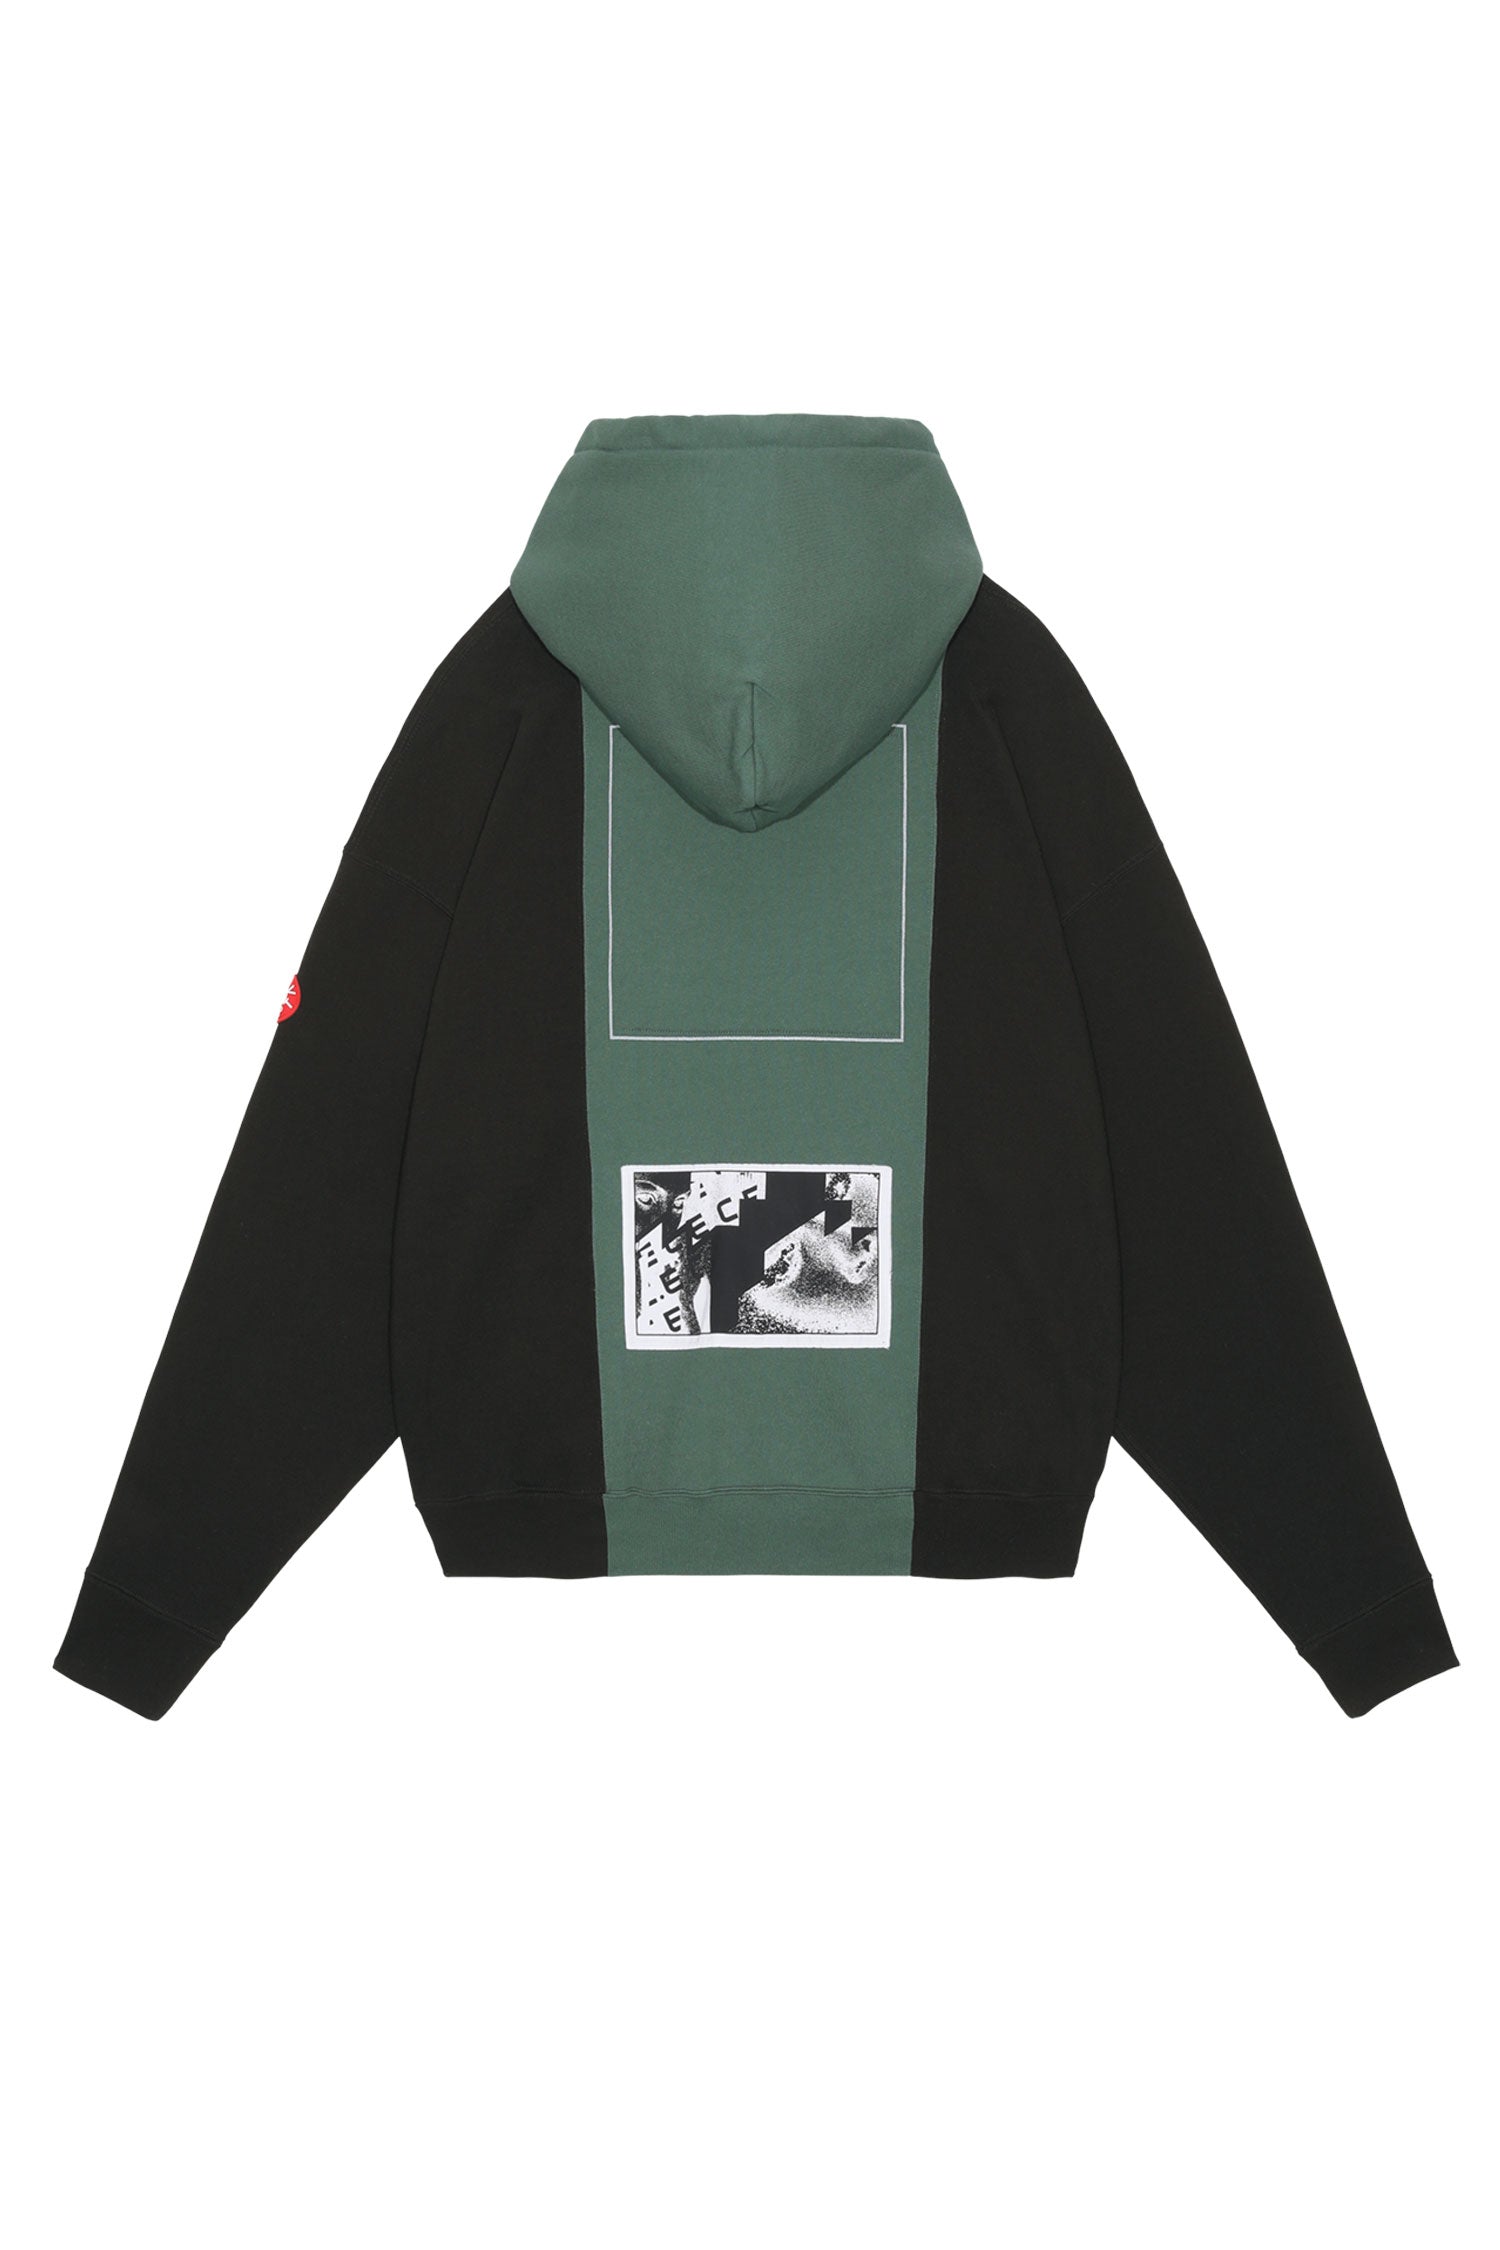 The CAV EMPT - PANELED TWO TONE HOODY  available online with global shipping, and in PAM Stores Melbourne and Sydney.